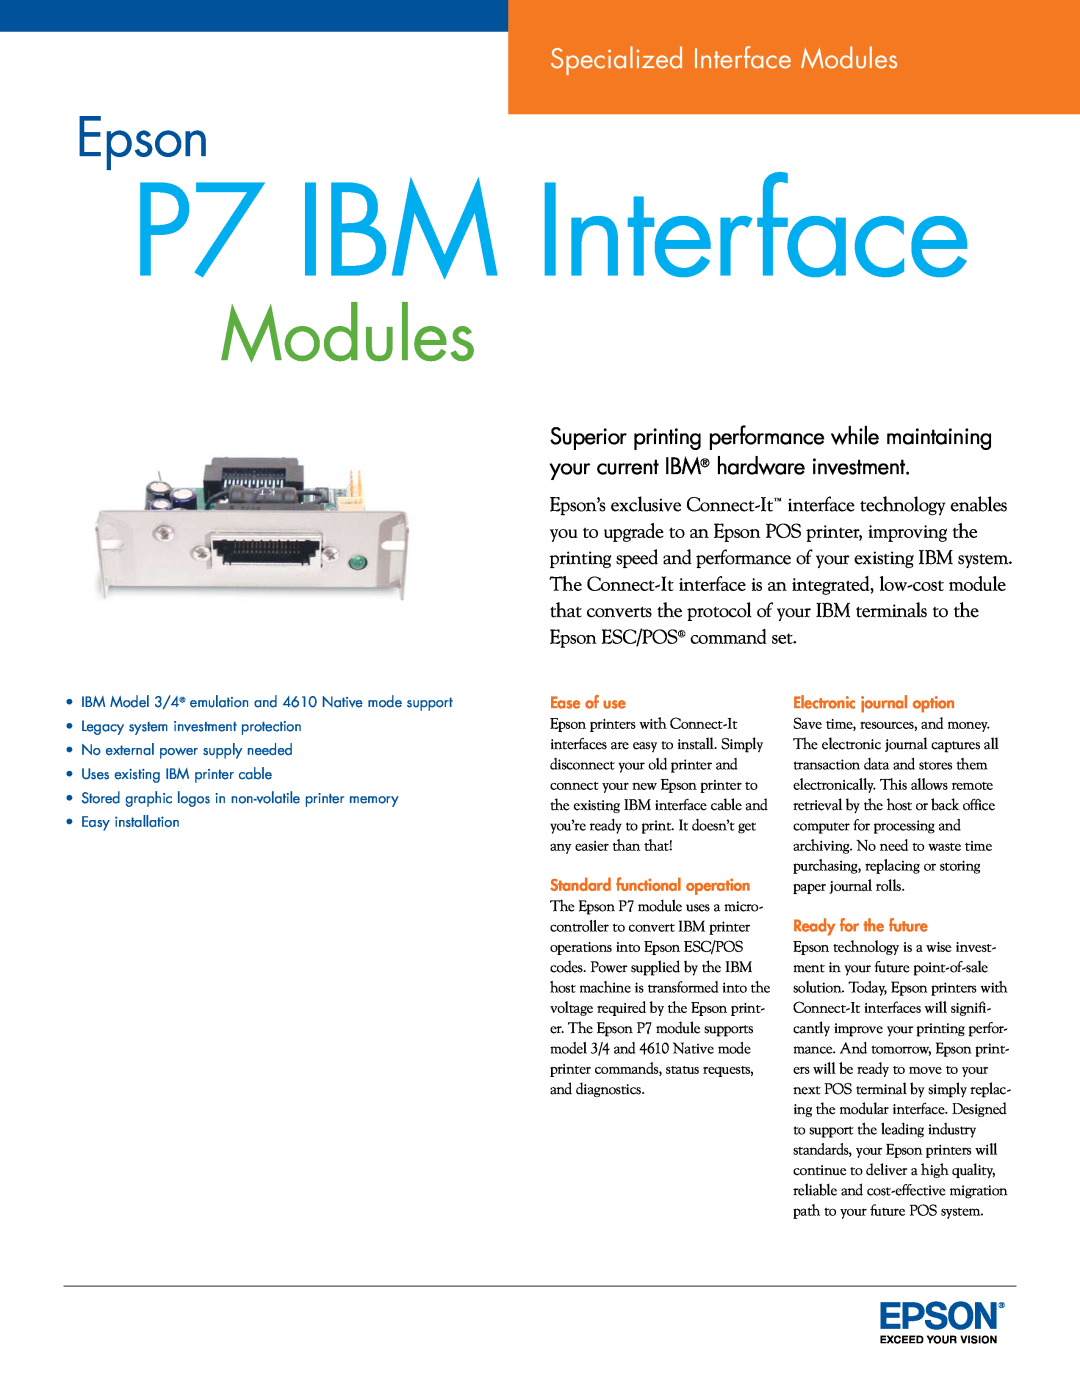 Epson manual P7 IBM Interface, Epson, Specialized Interface Modules, Ease of use, Electronic journal option 